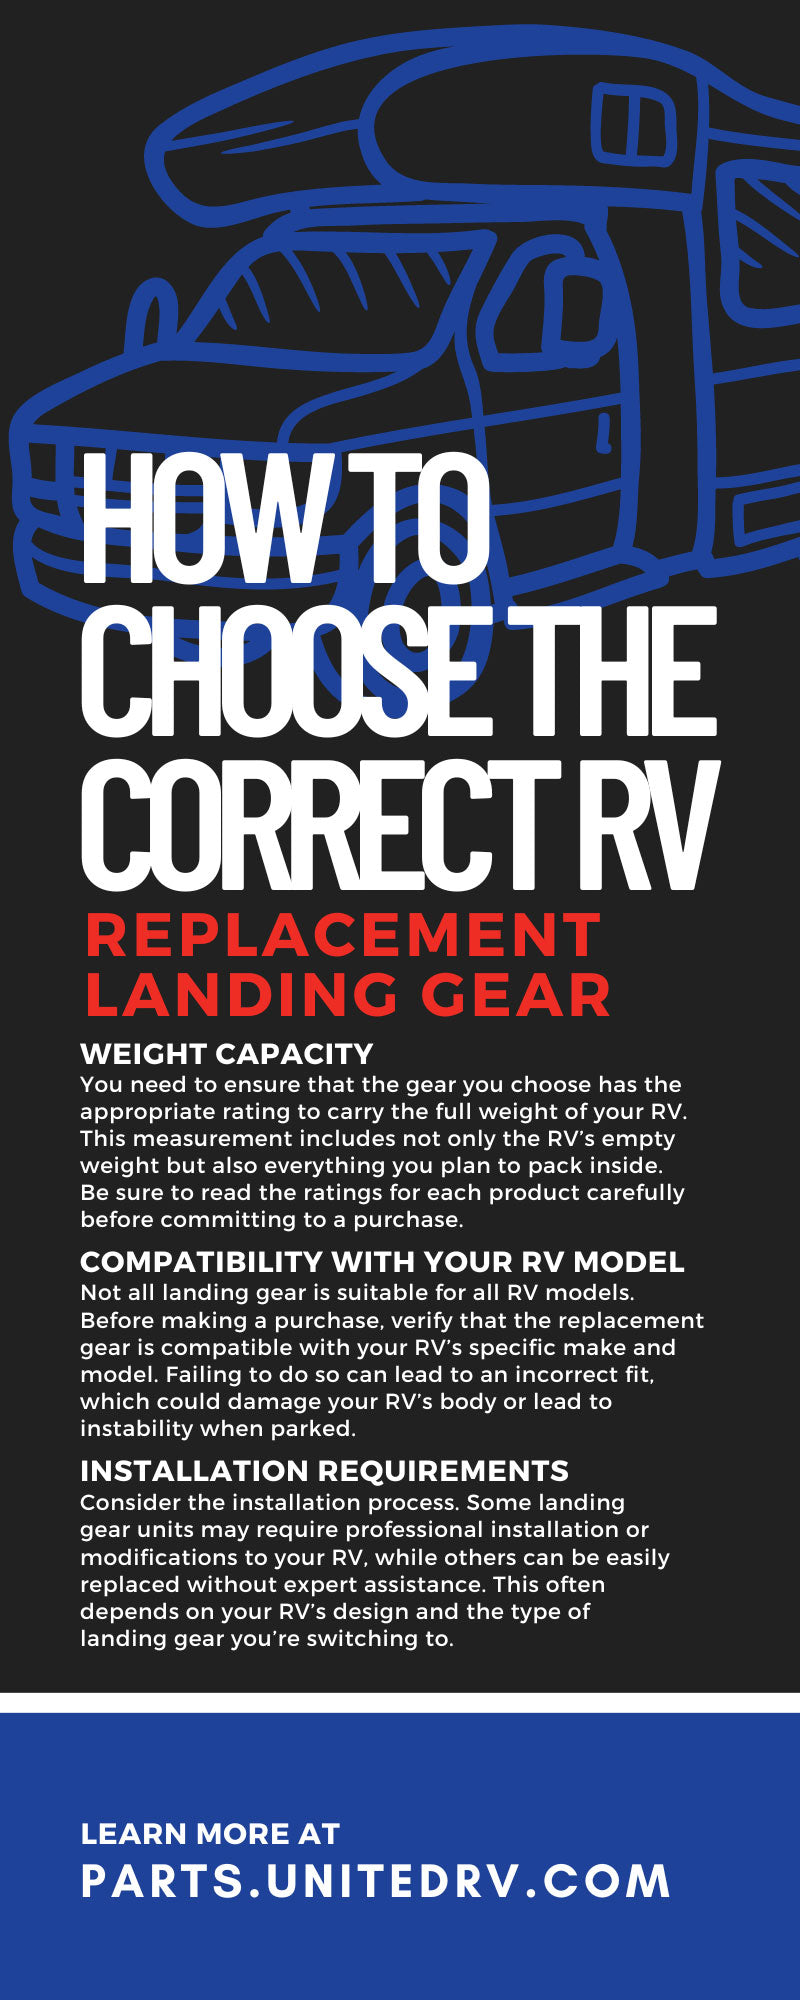 How To Choose the Correct RV Replacement Landing Gear